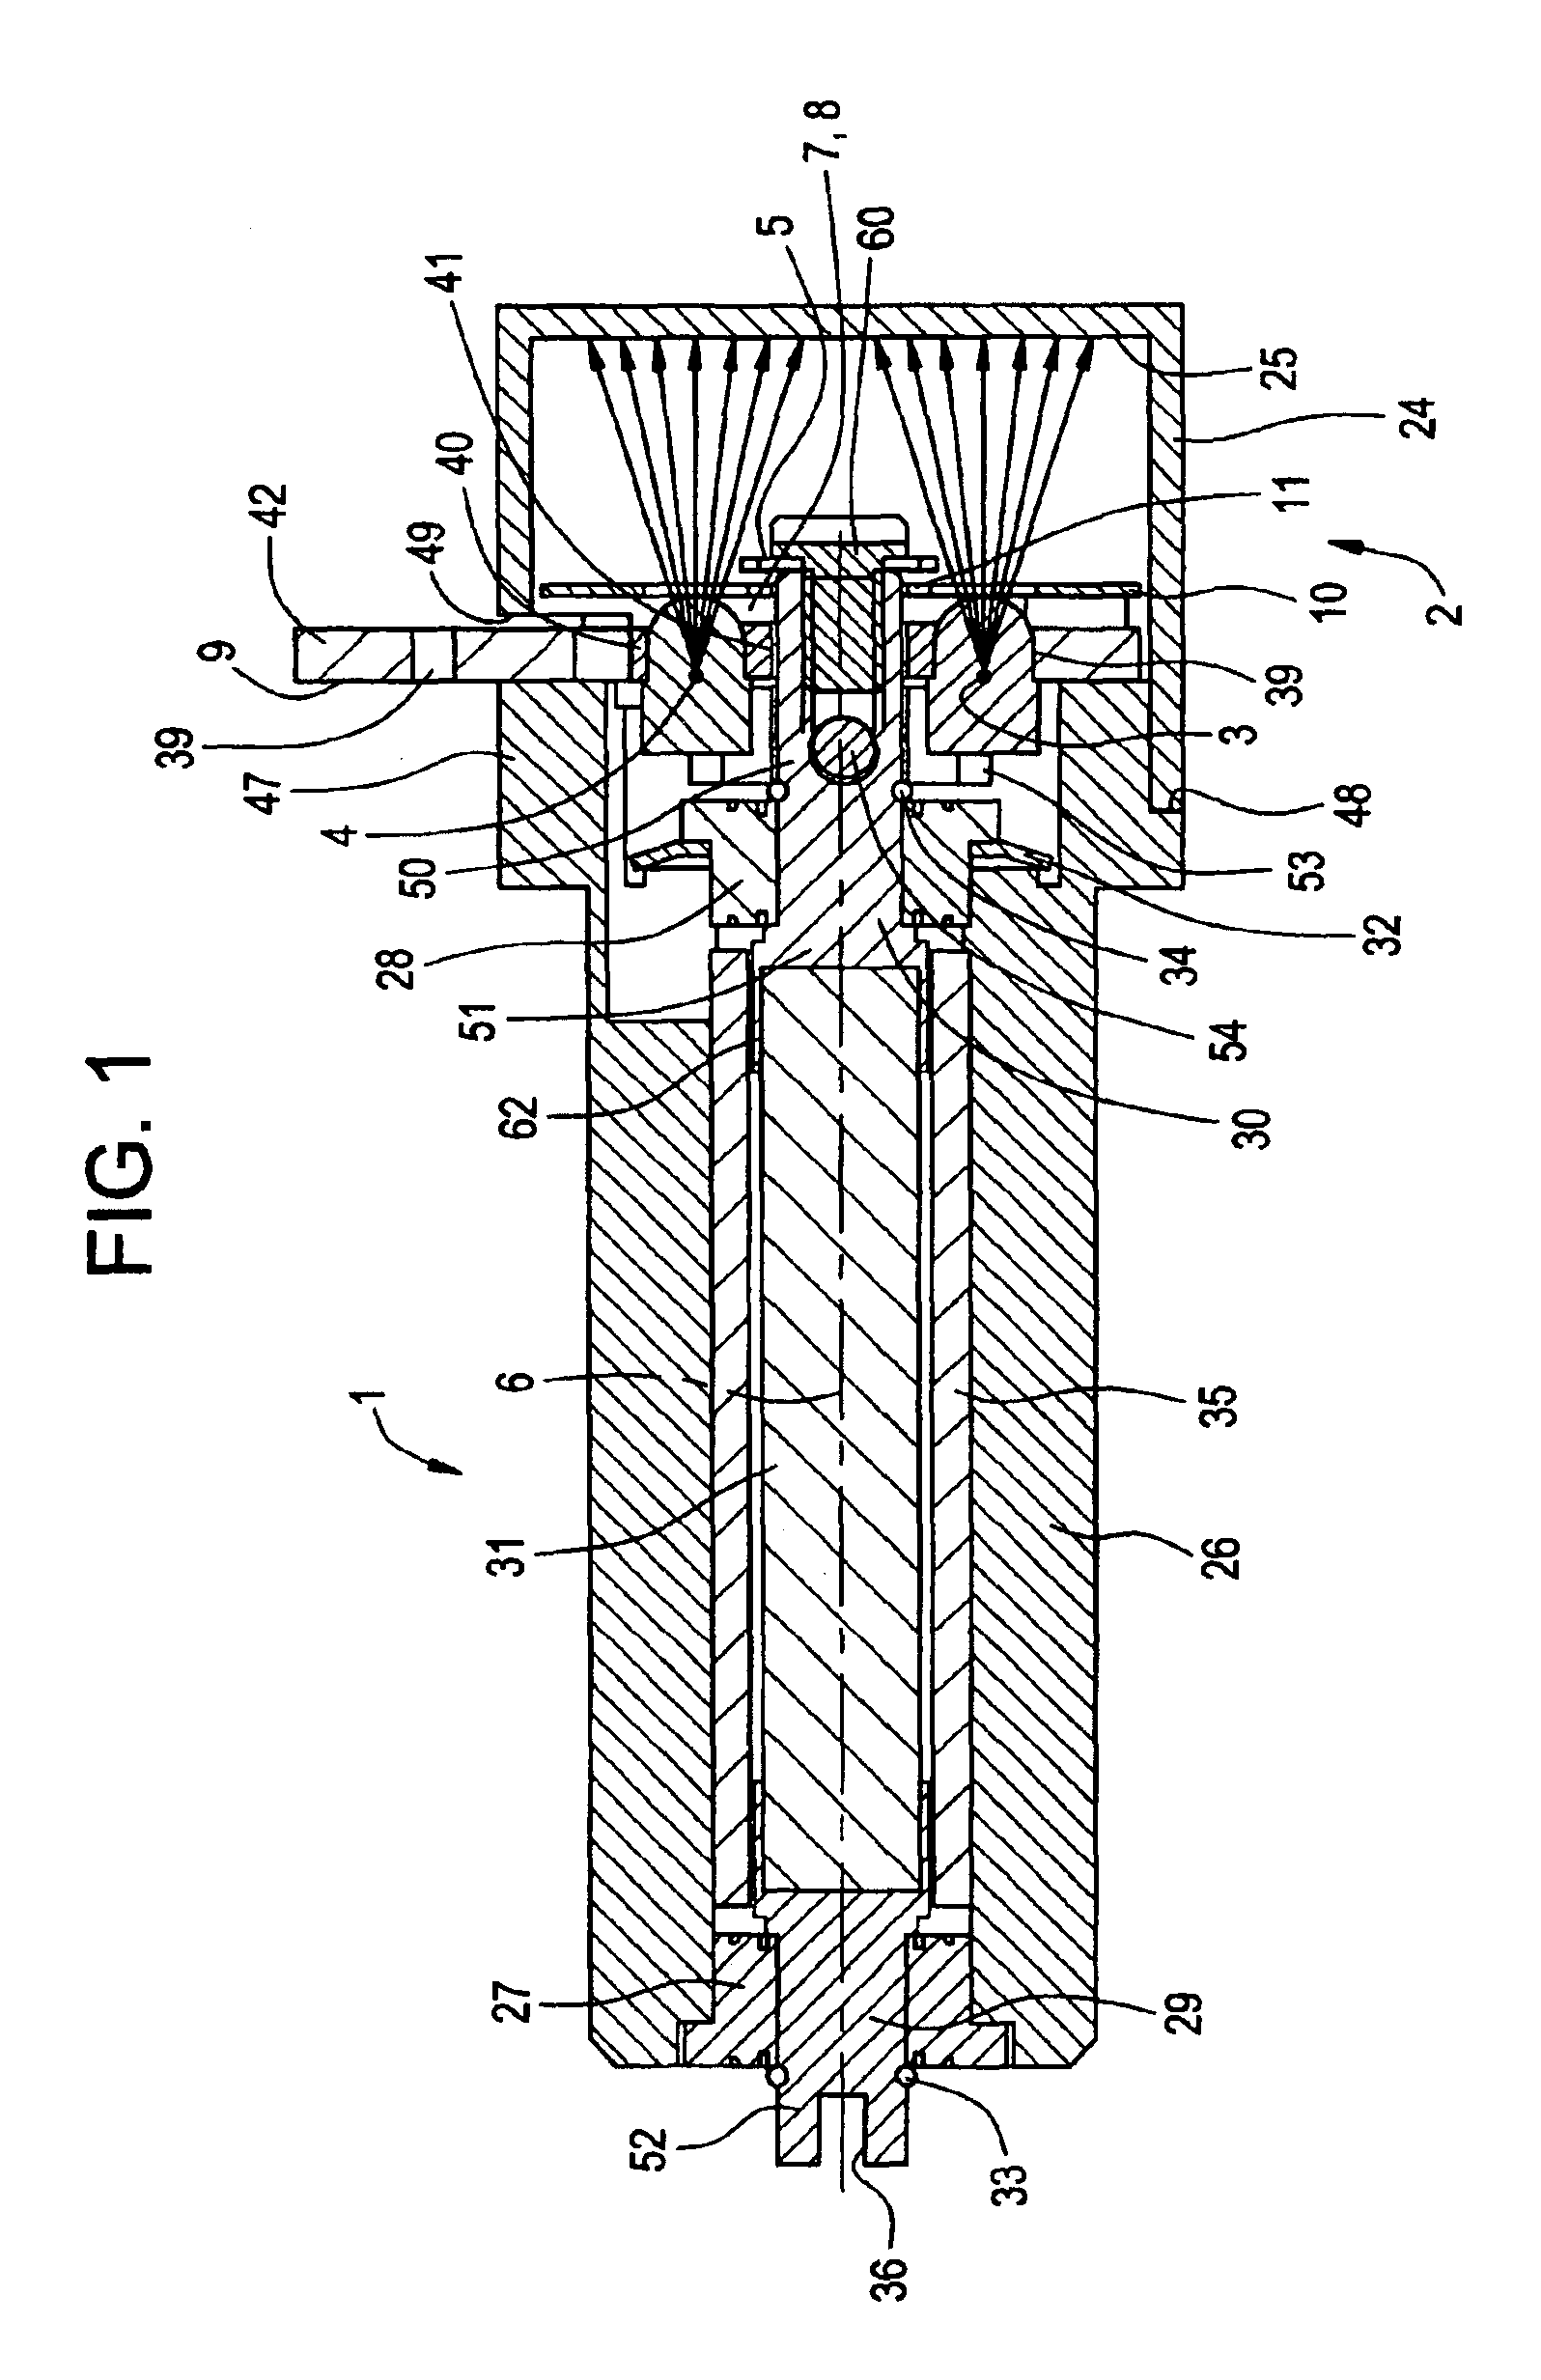 Position detector for a scanning device